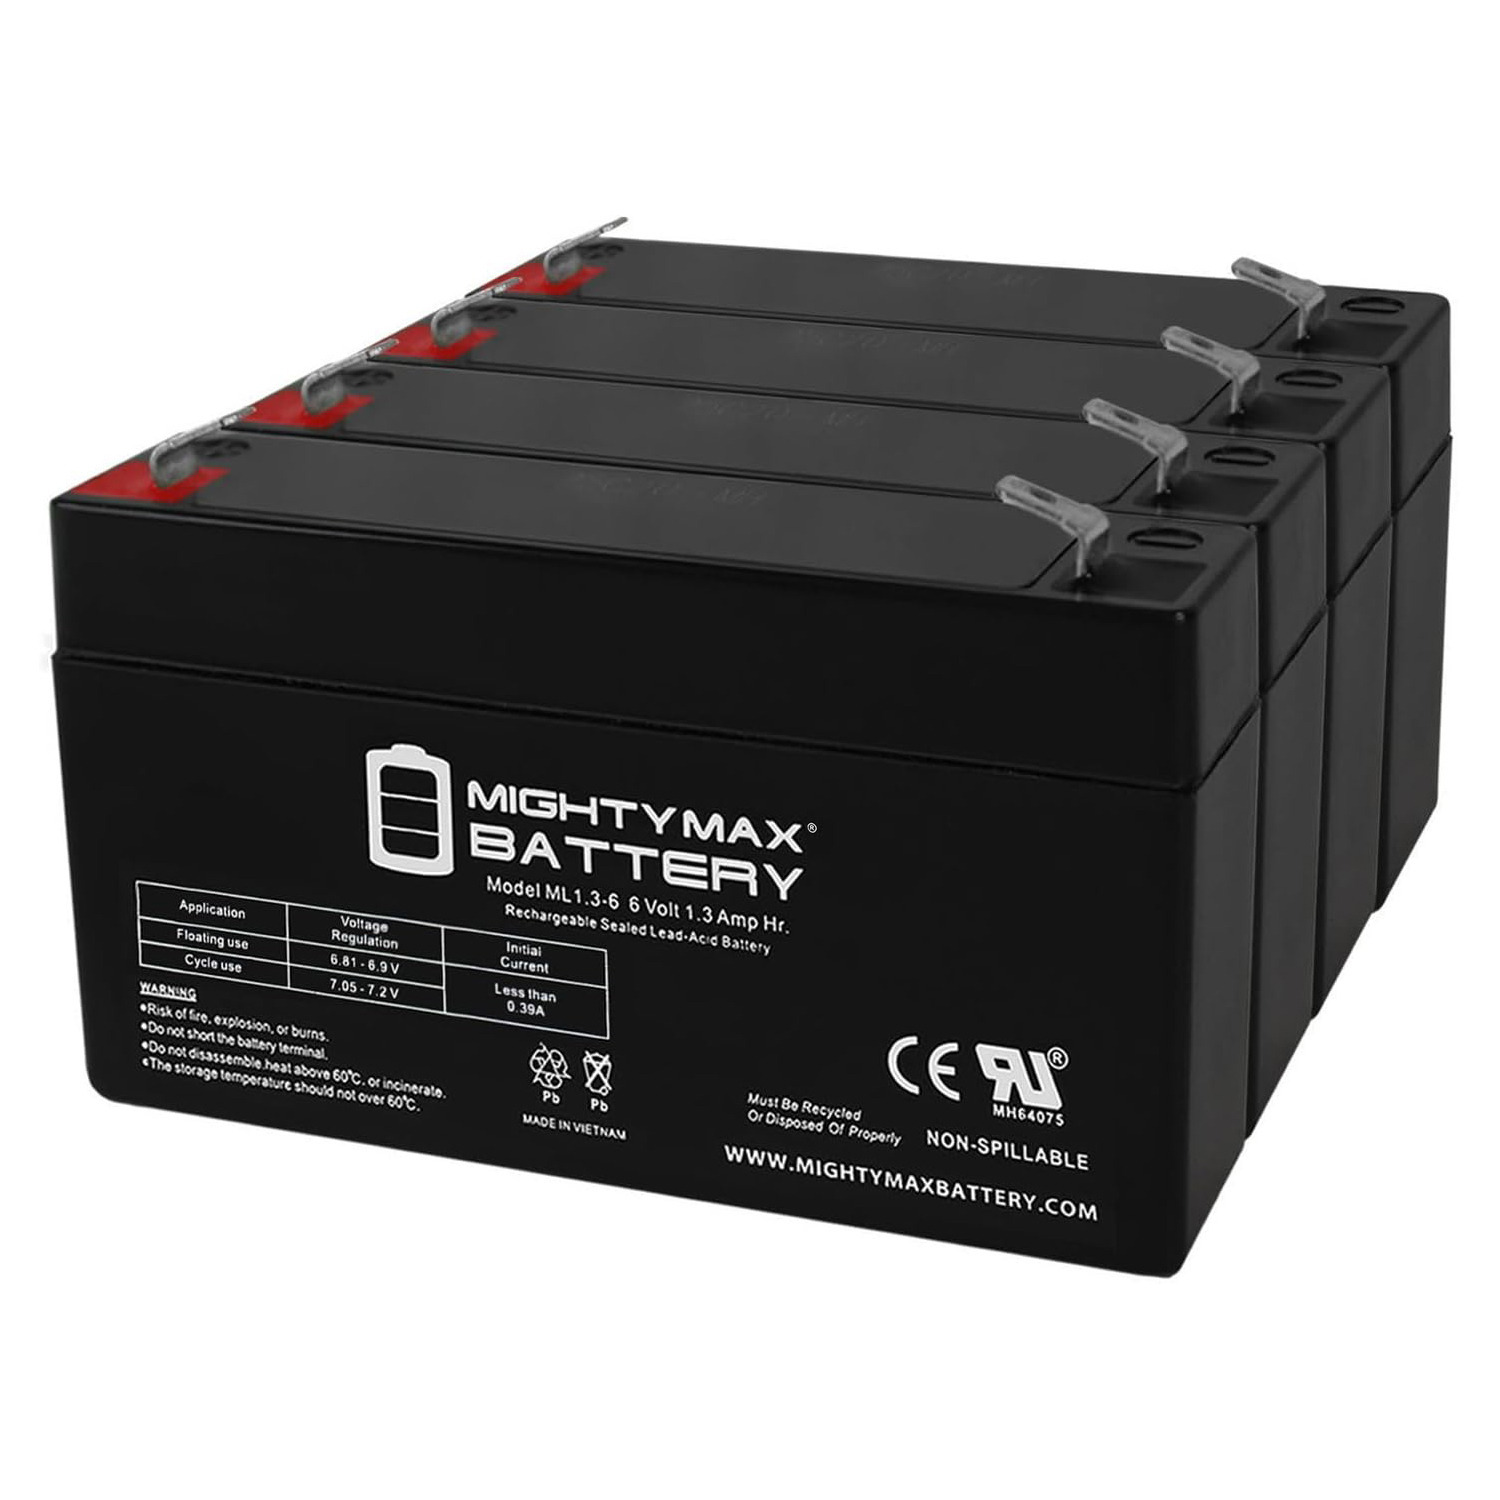 6V 1.3Ah SLA BATTERY REPLACEMENT PC612 NP1.2-6 PS-612 - 4 Pack